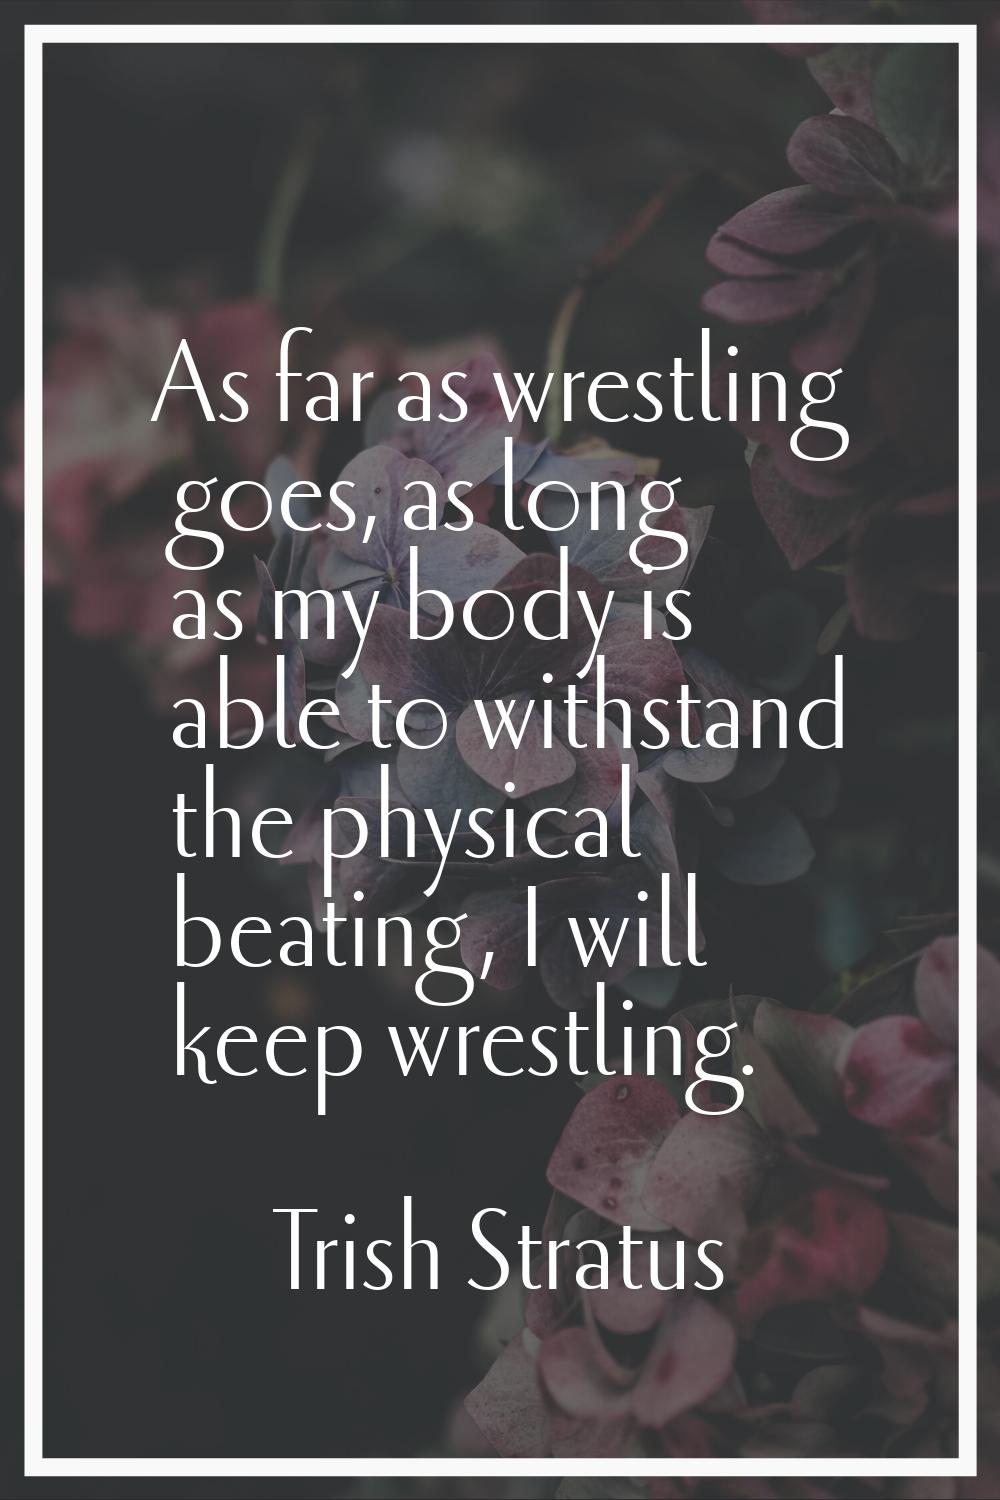 As far as wrestling goes, as long as my body is able to withstand the physical beating, I will keep